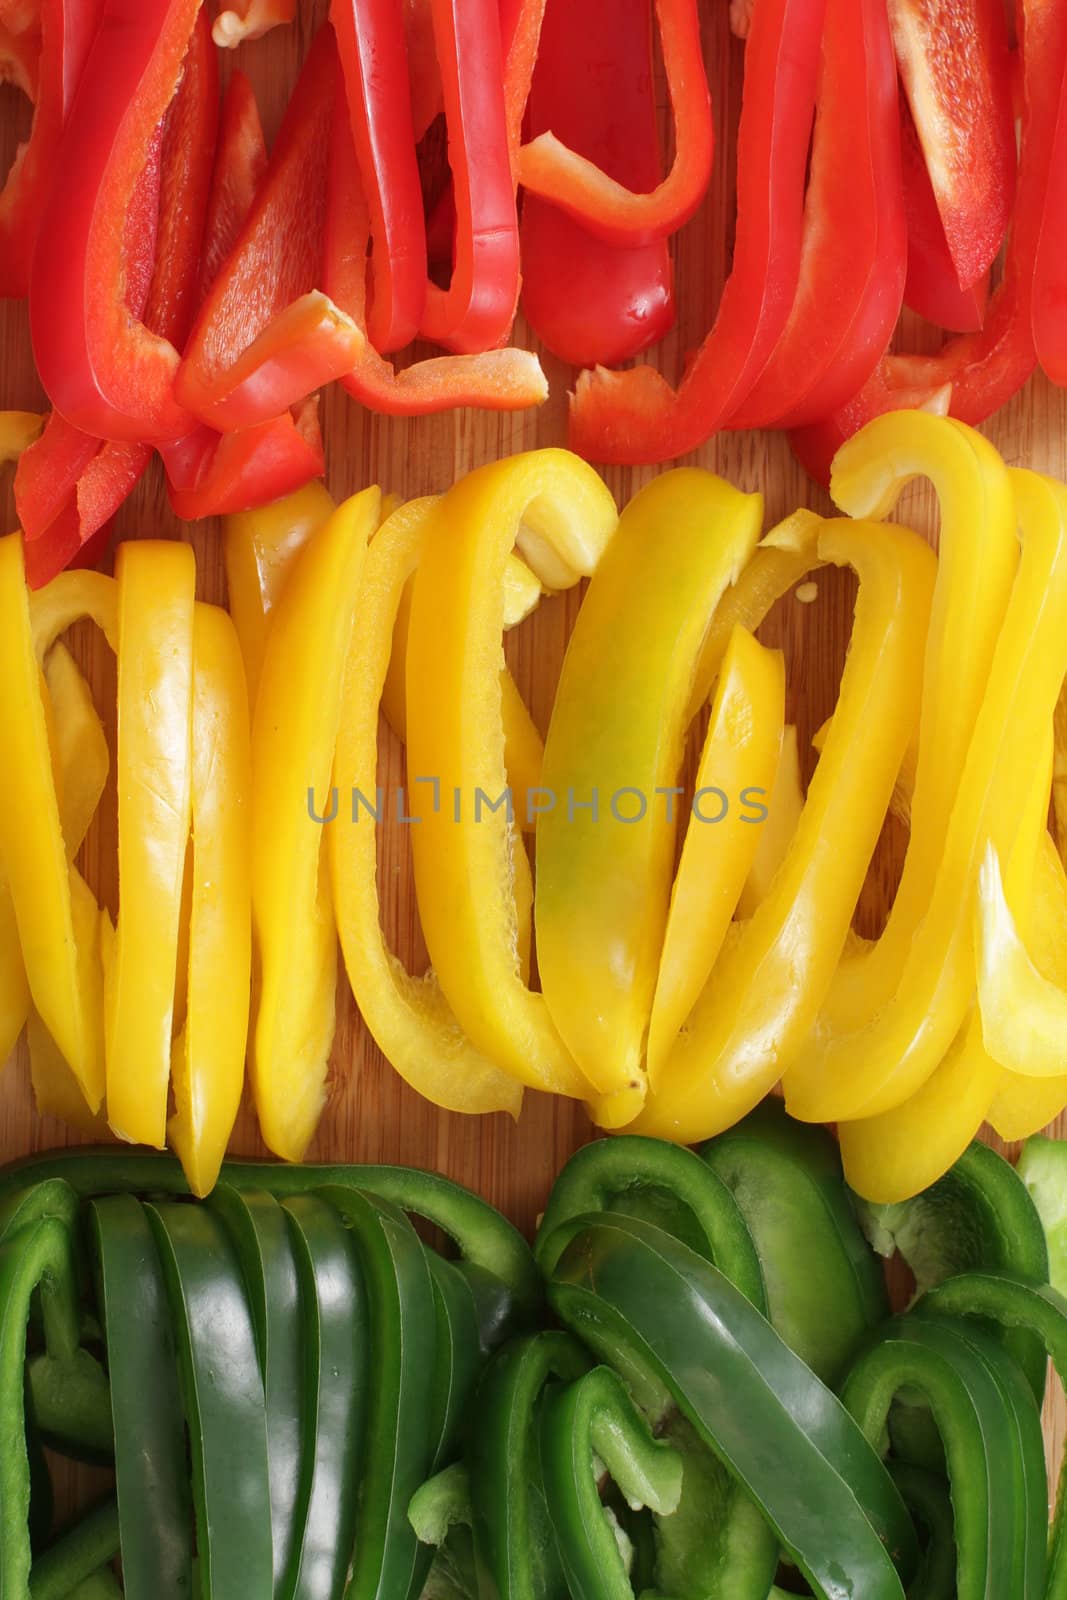 many pepper slices on a wooden background